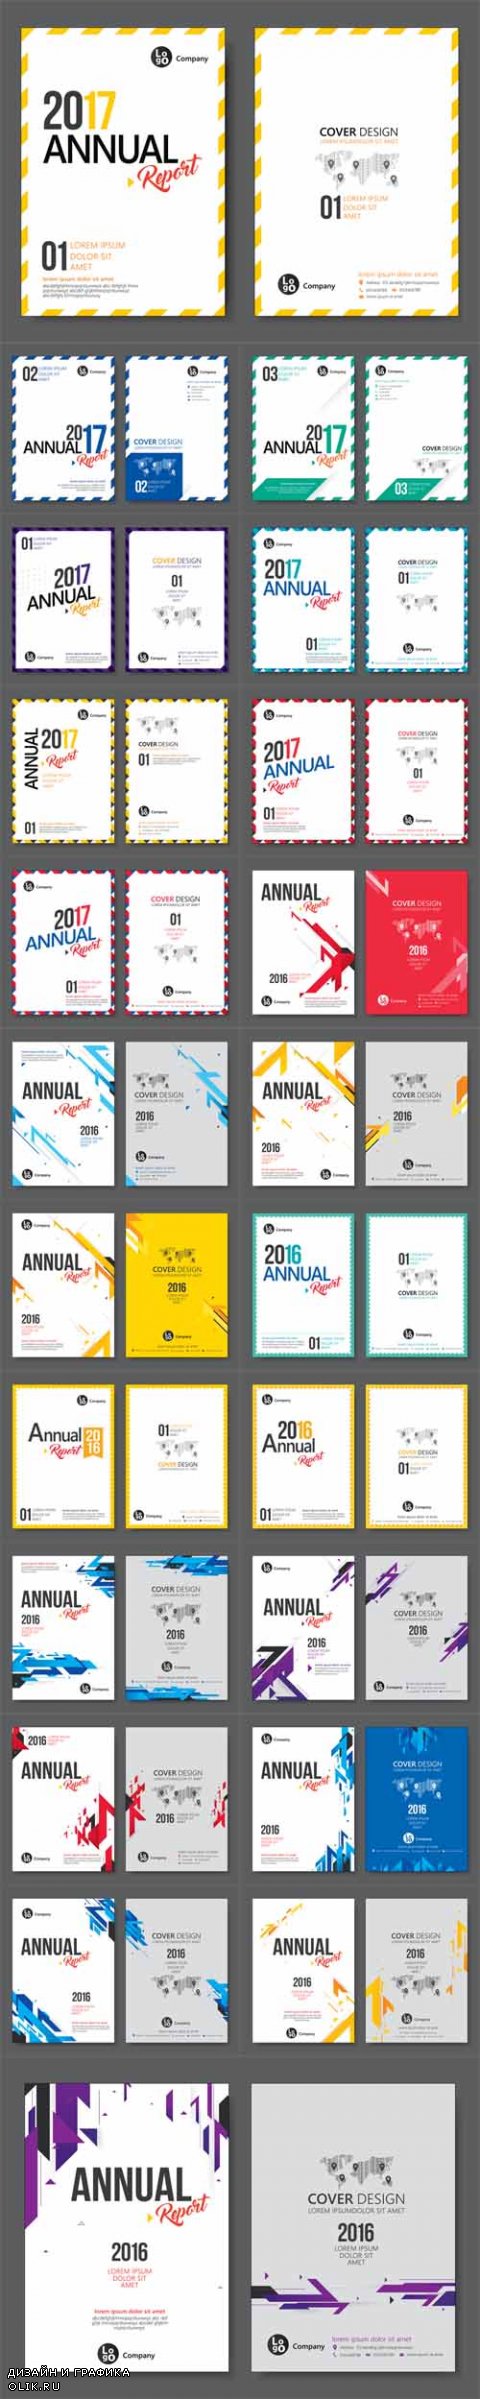 Vector Flyer, Leafle, Annual Report Templates Flat Design in A4 Size